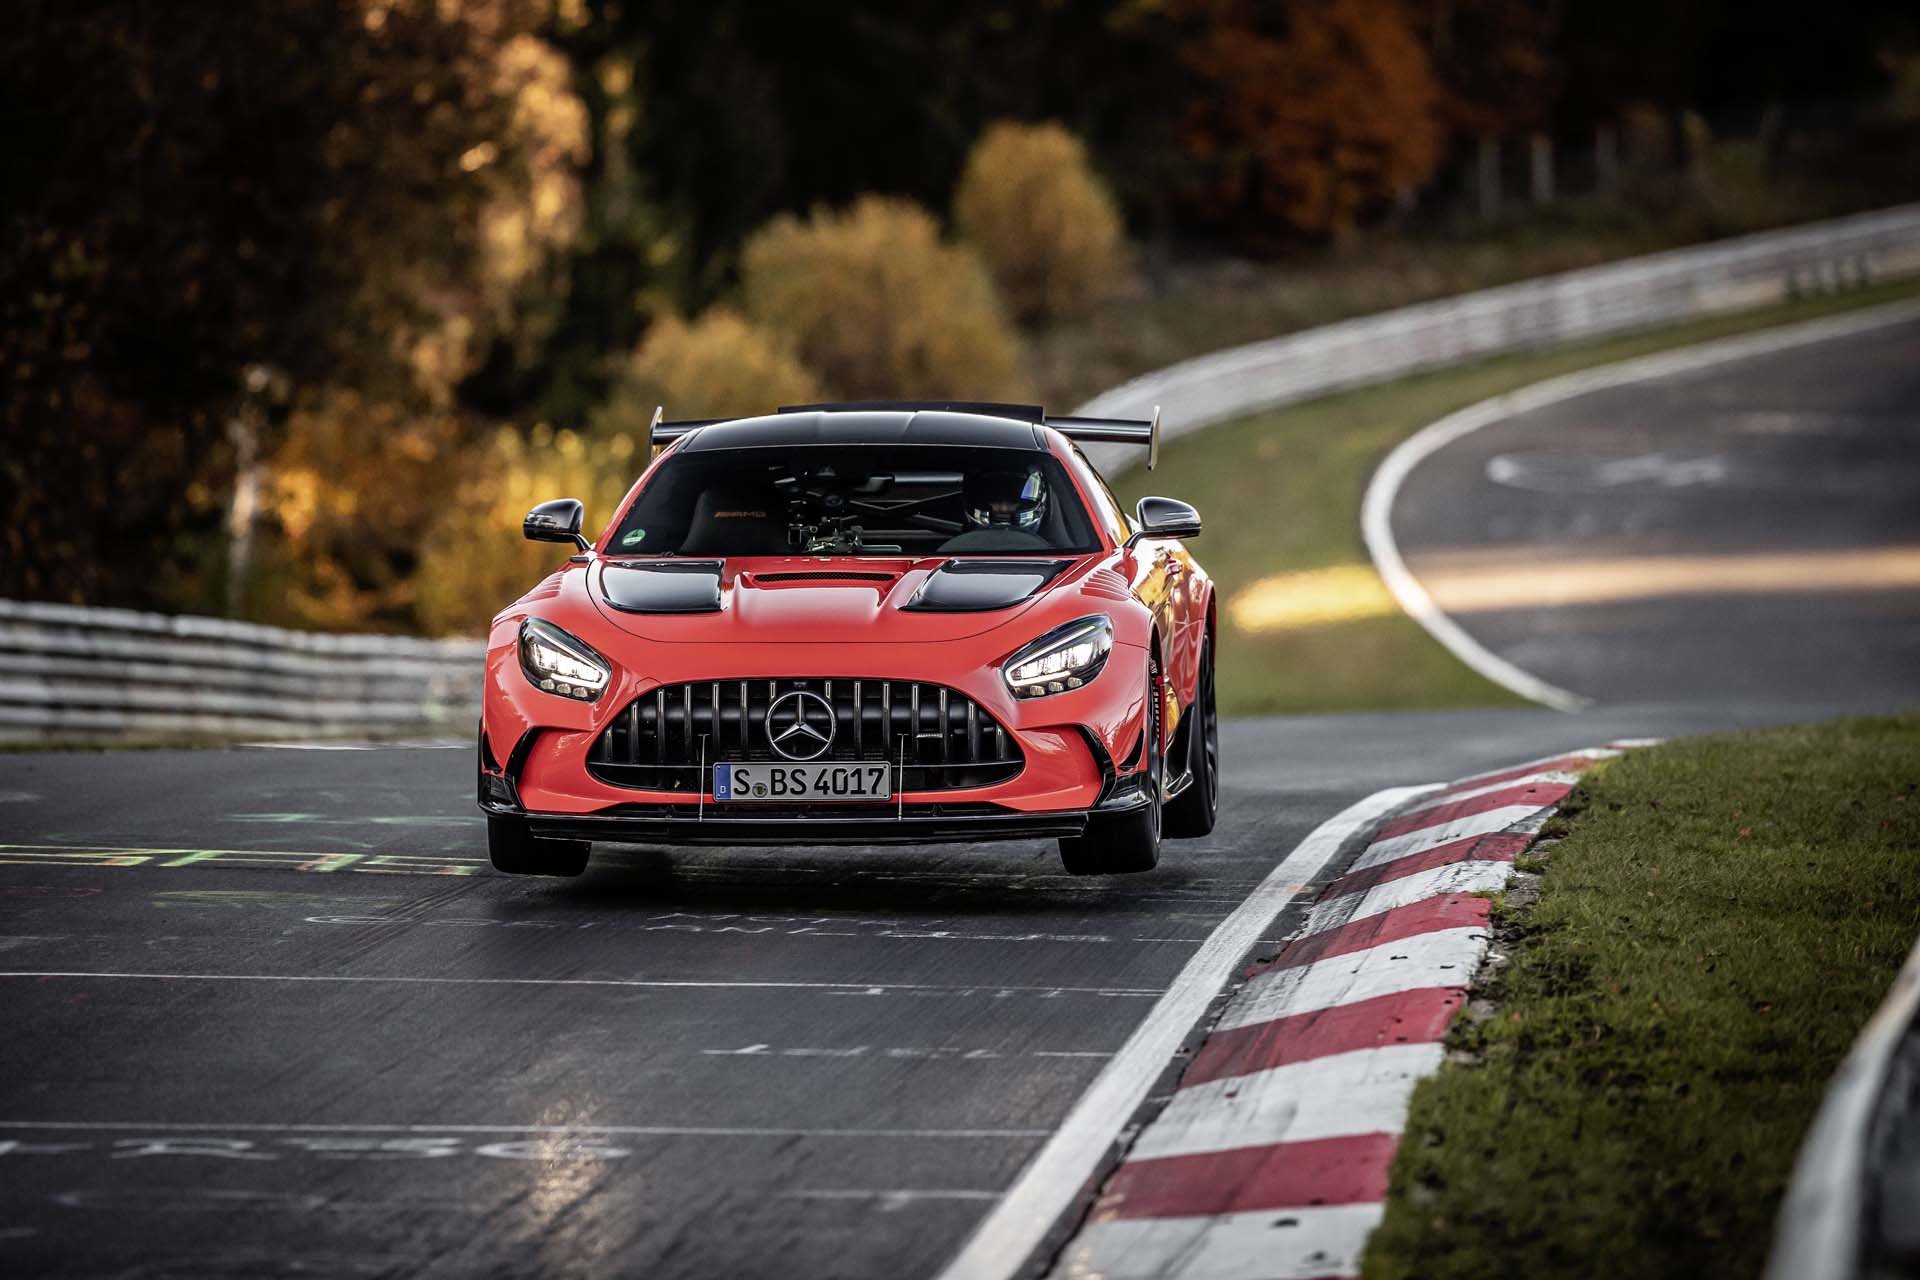 Mercedes Benz Amg Gt Black Series Sets New Bar With 6 43 61 Nurburgring Production Car Lap Record